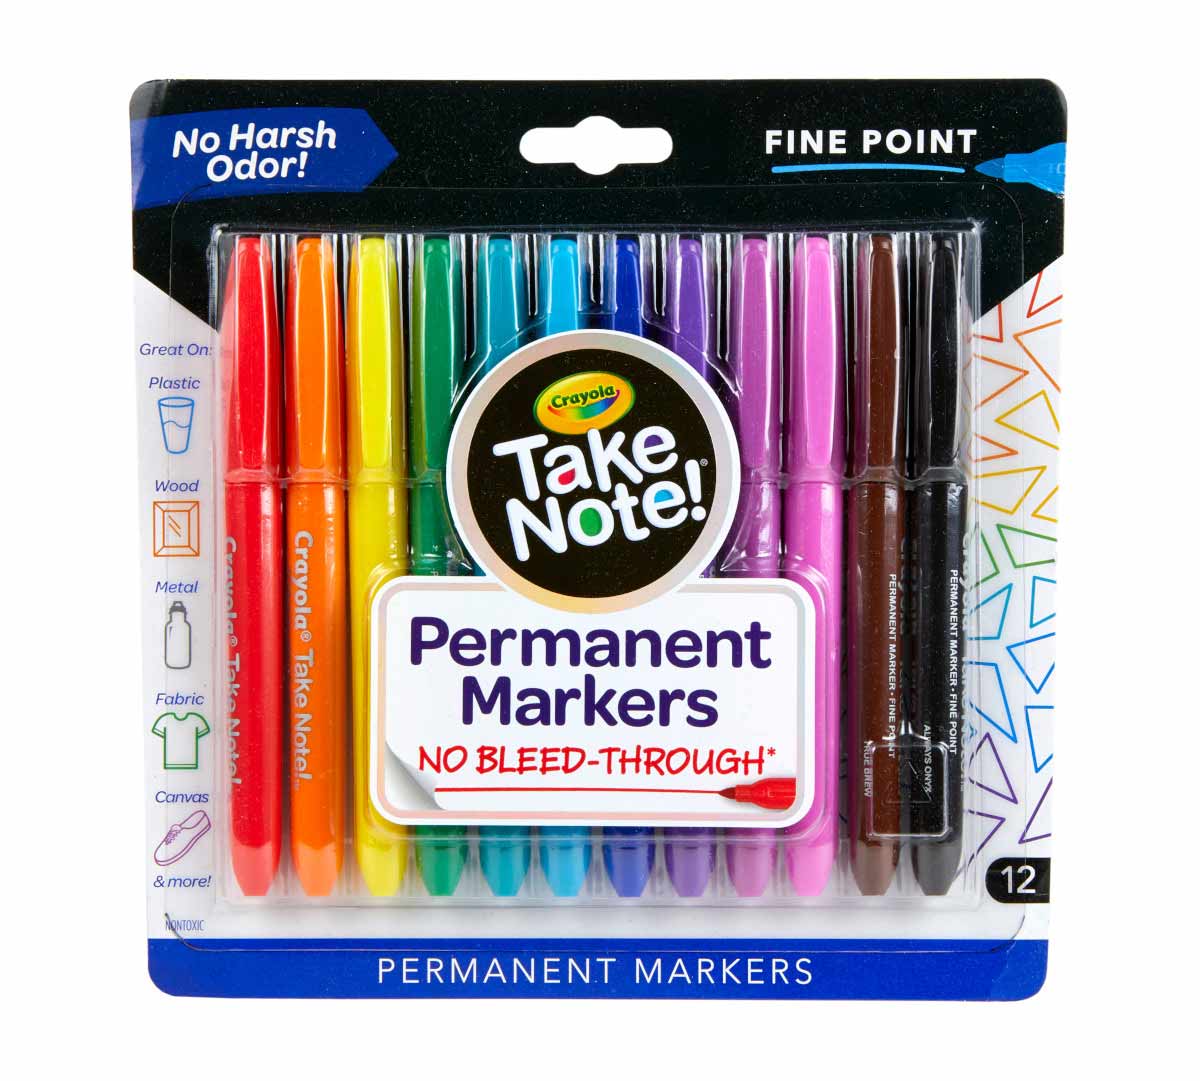 https://shop.crayola.com/on/demandware.static/-/Sites-crayola-storefront/default/dwa9982001/images/58-6426-0-300_Take-Note_No-Bleed-Through-Permanent-Markers_12ct_F1.jpg